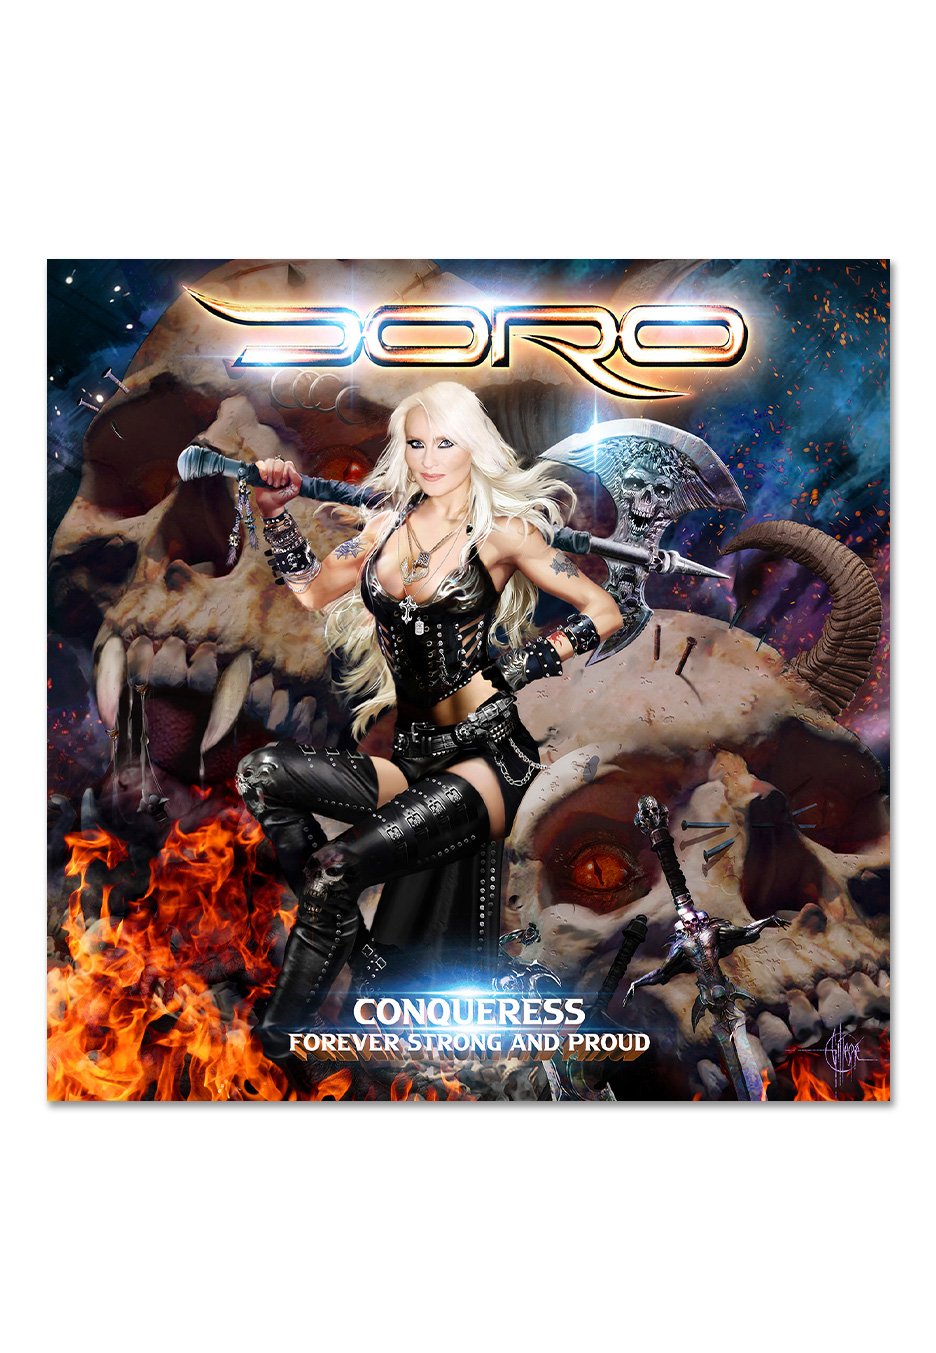 Doro - Conqueress - Forever Strong And Proud Ltd. - Picture 2 Vinyl